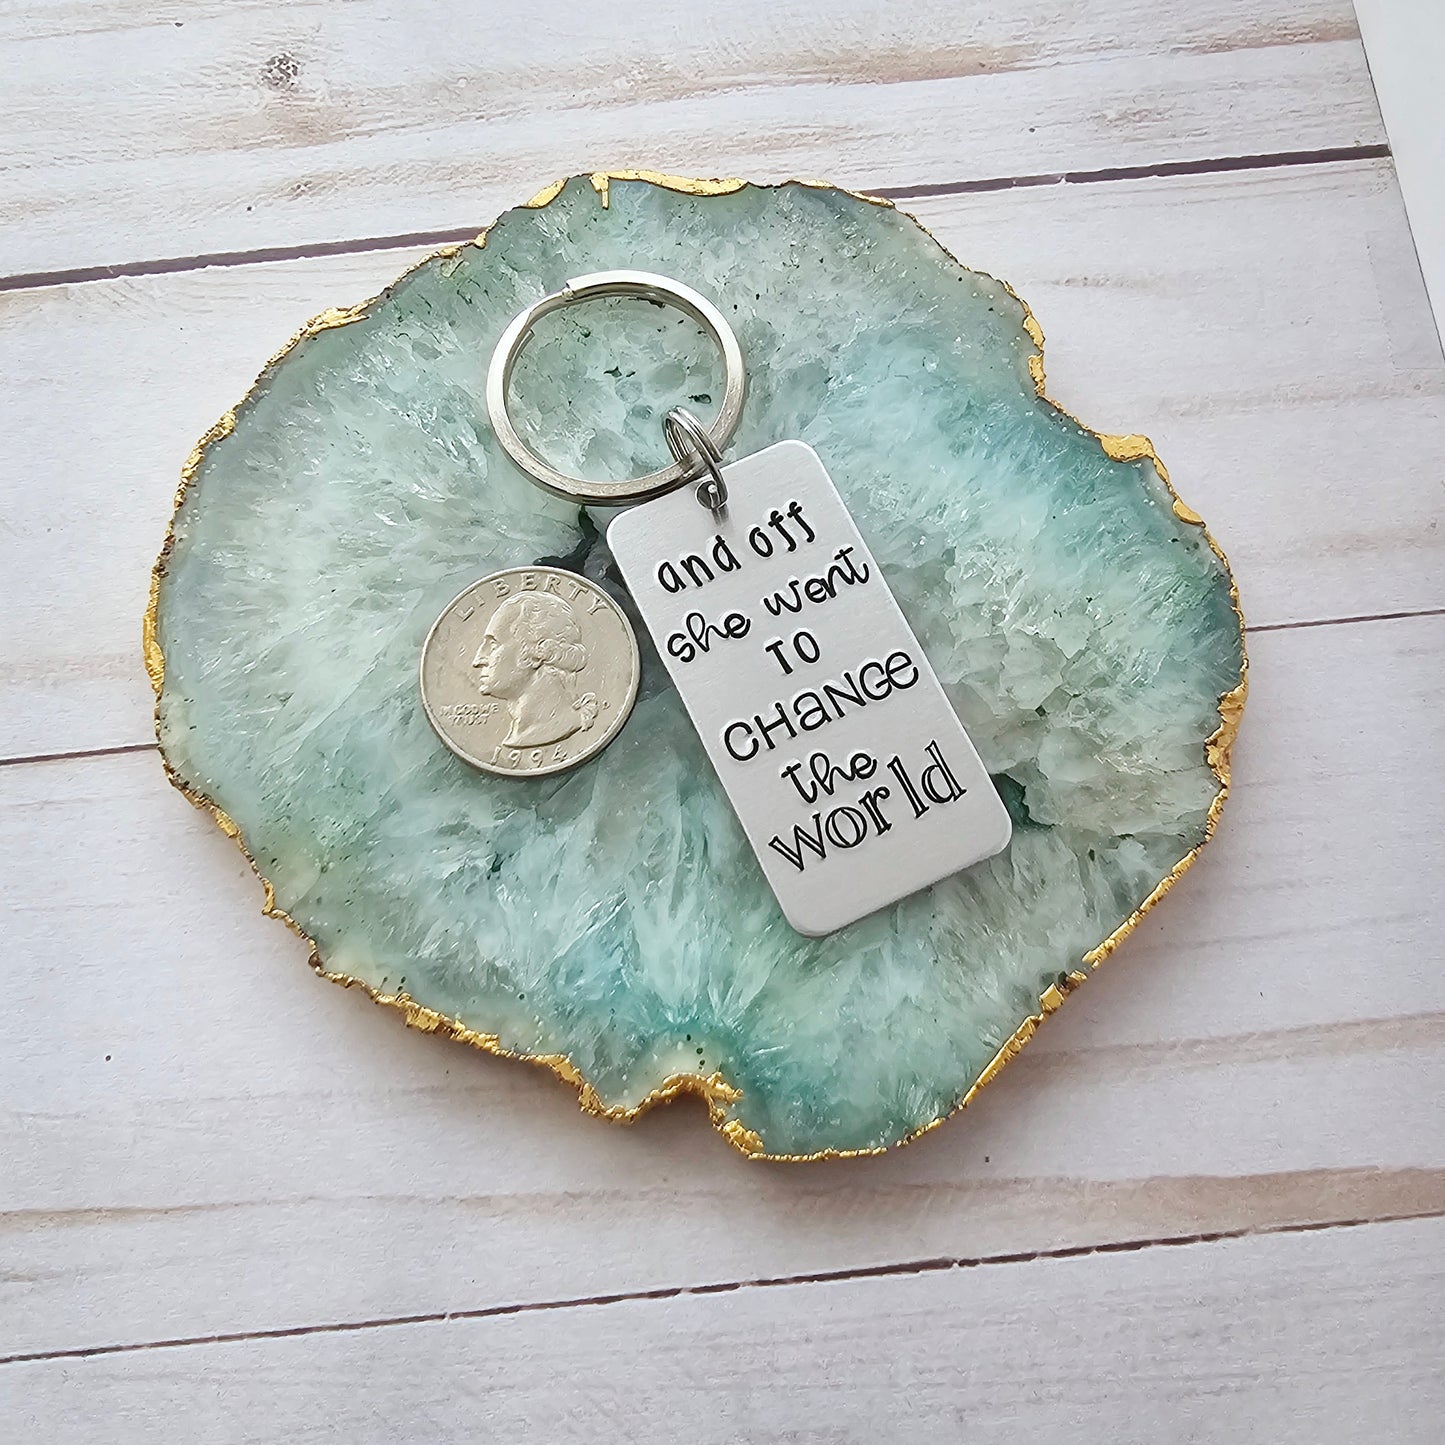 Personalized Class of 2024 Graduation Gift, And Off She Went to Change the World. Custom Name Charm Key Chain, Inspirational Quote for Her